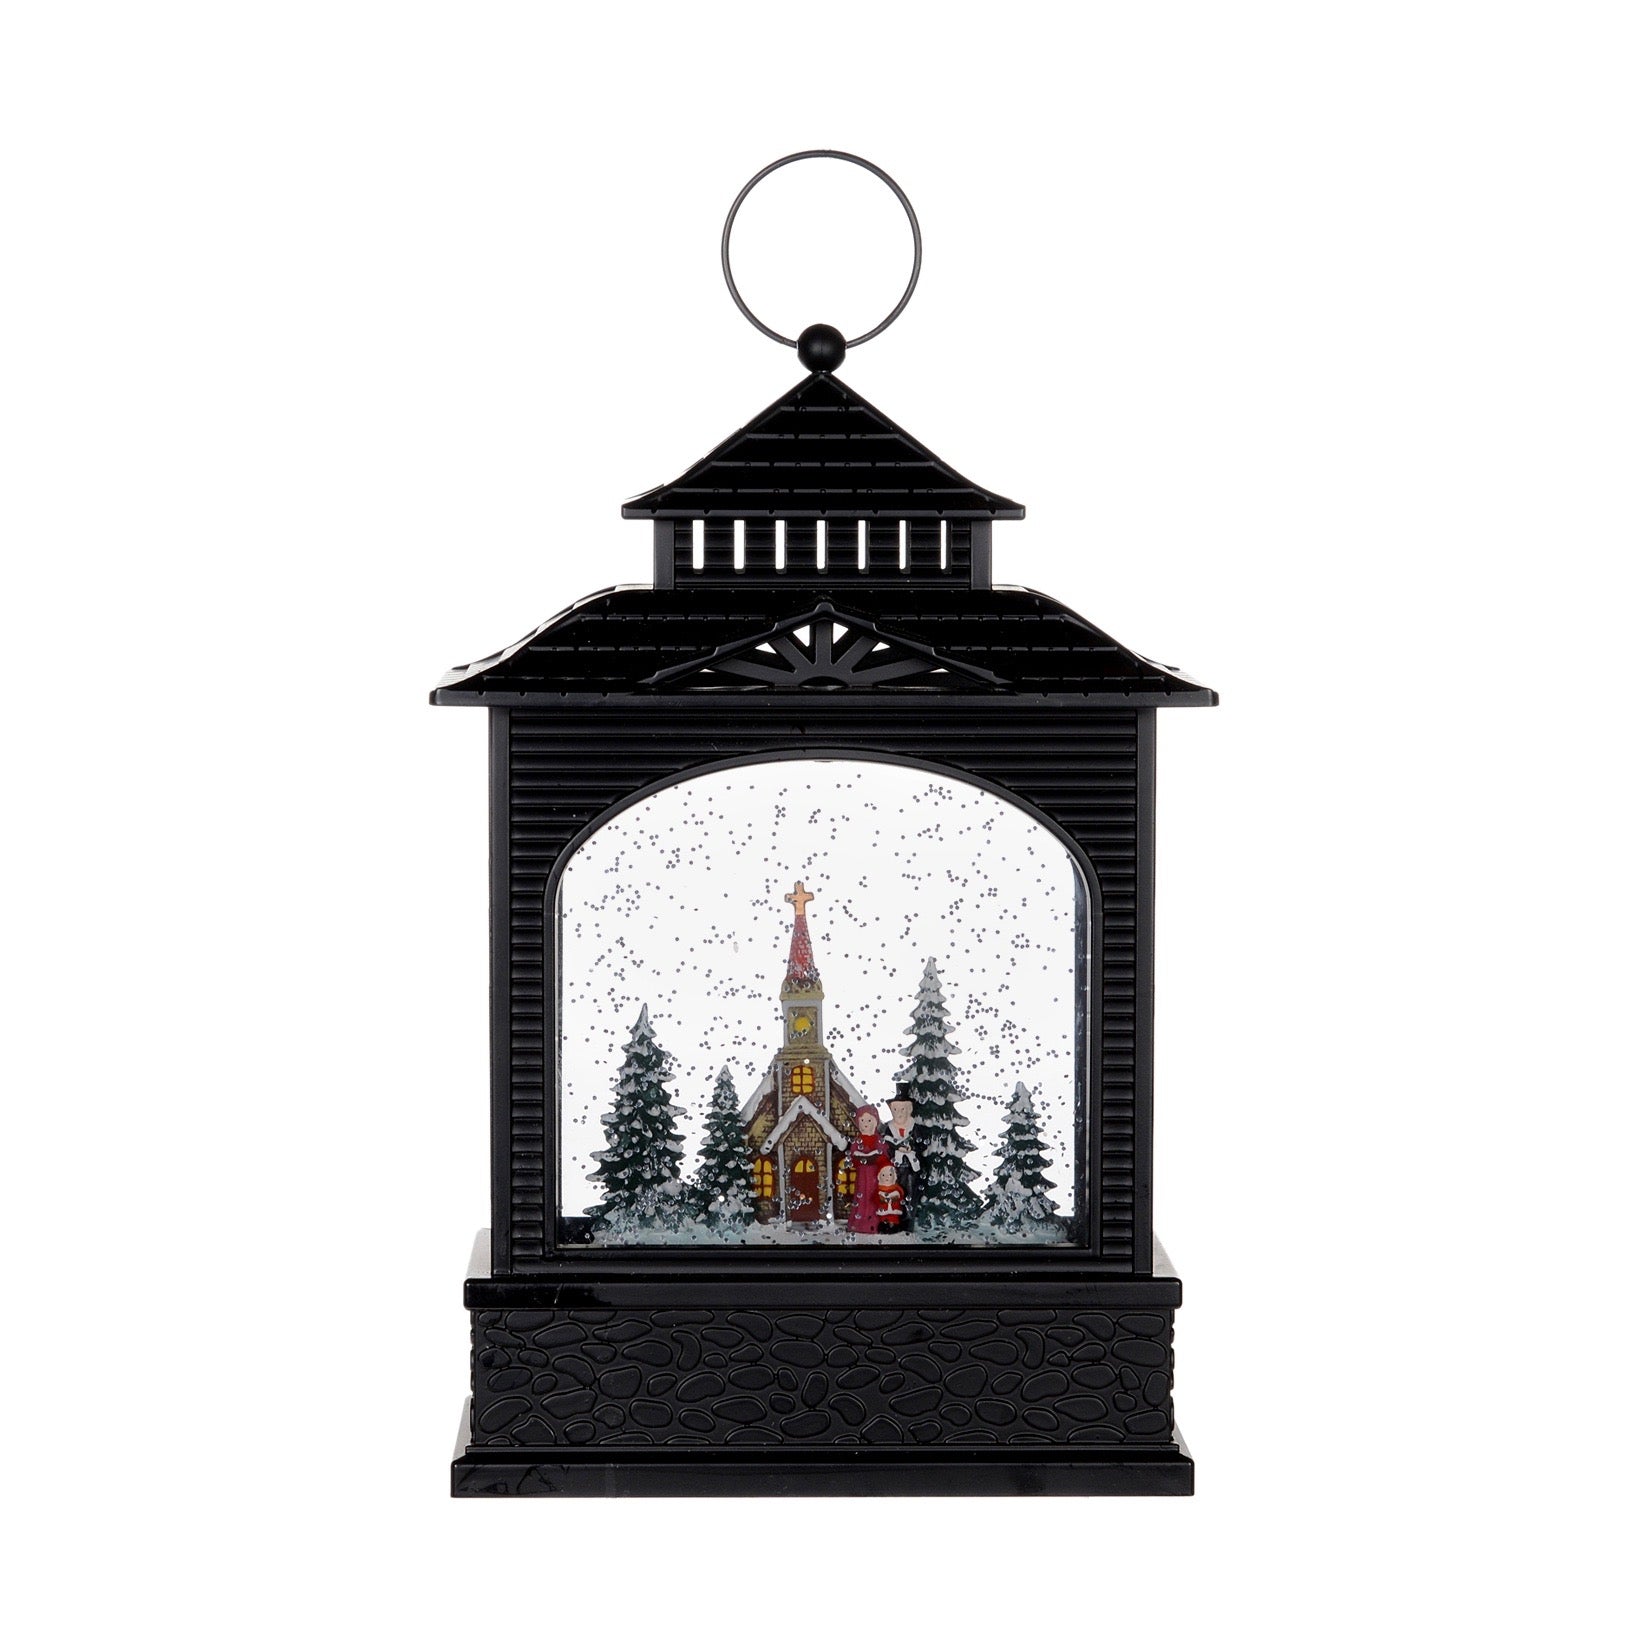 Perpetual Snow Globes and Lanterns